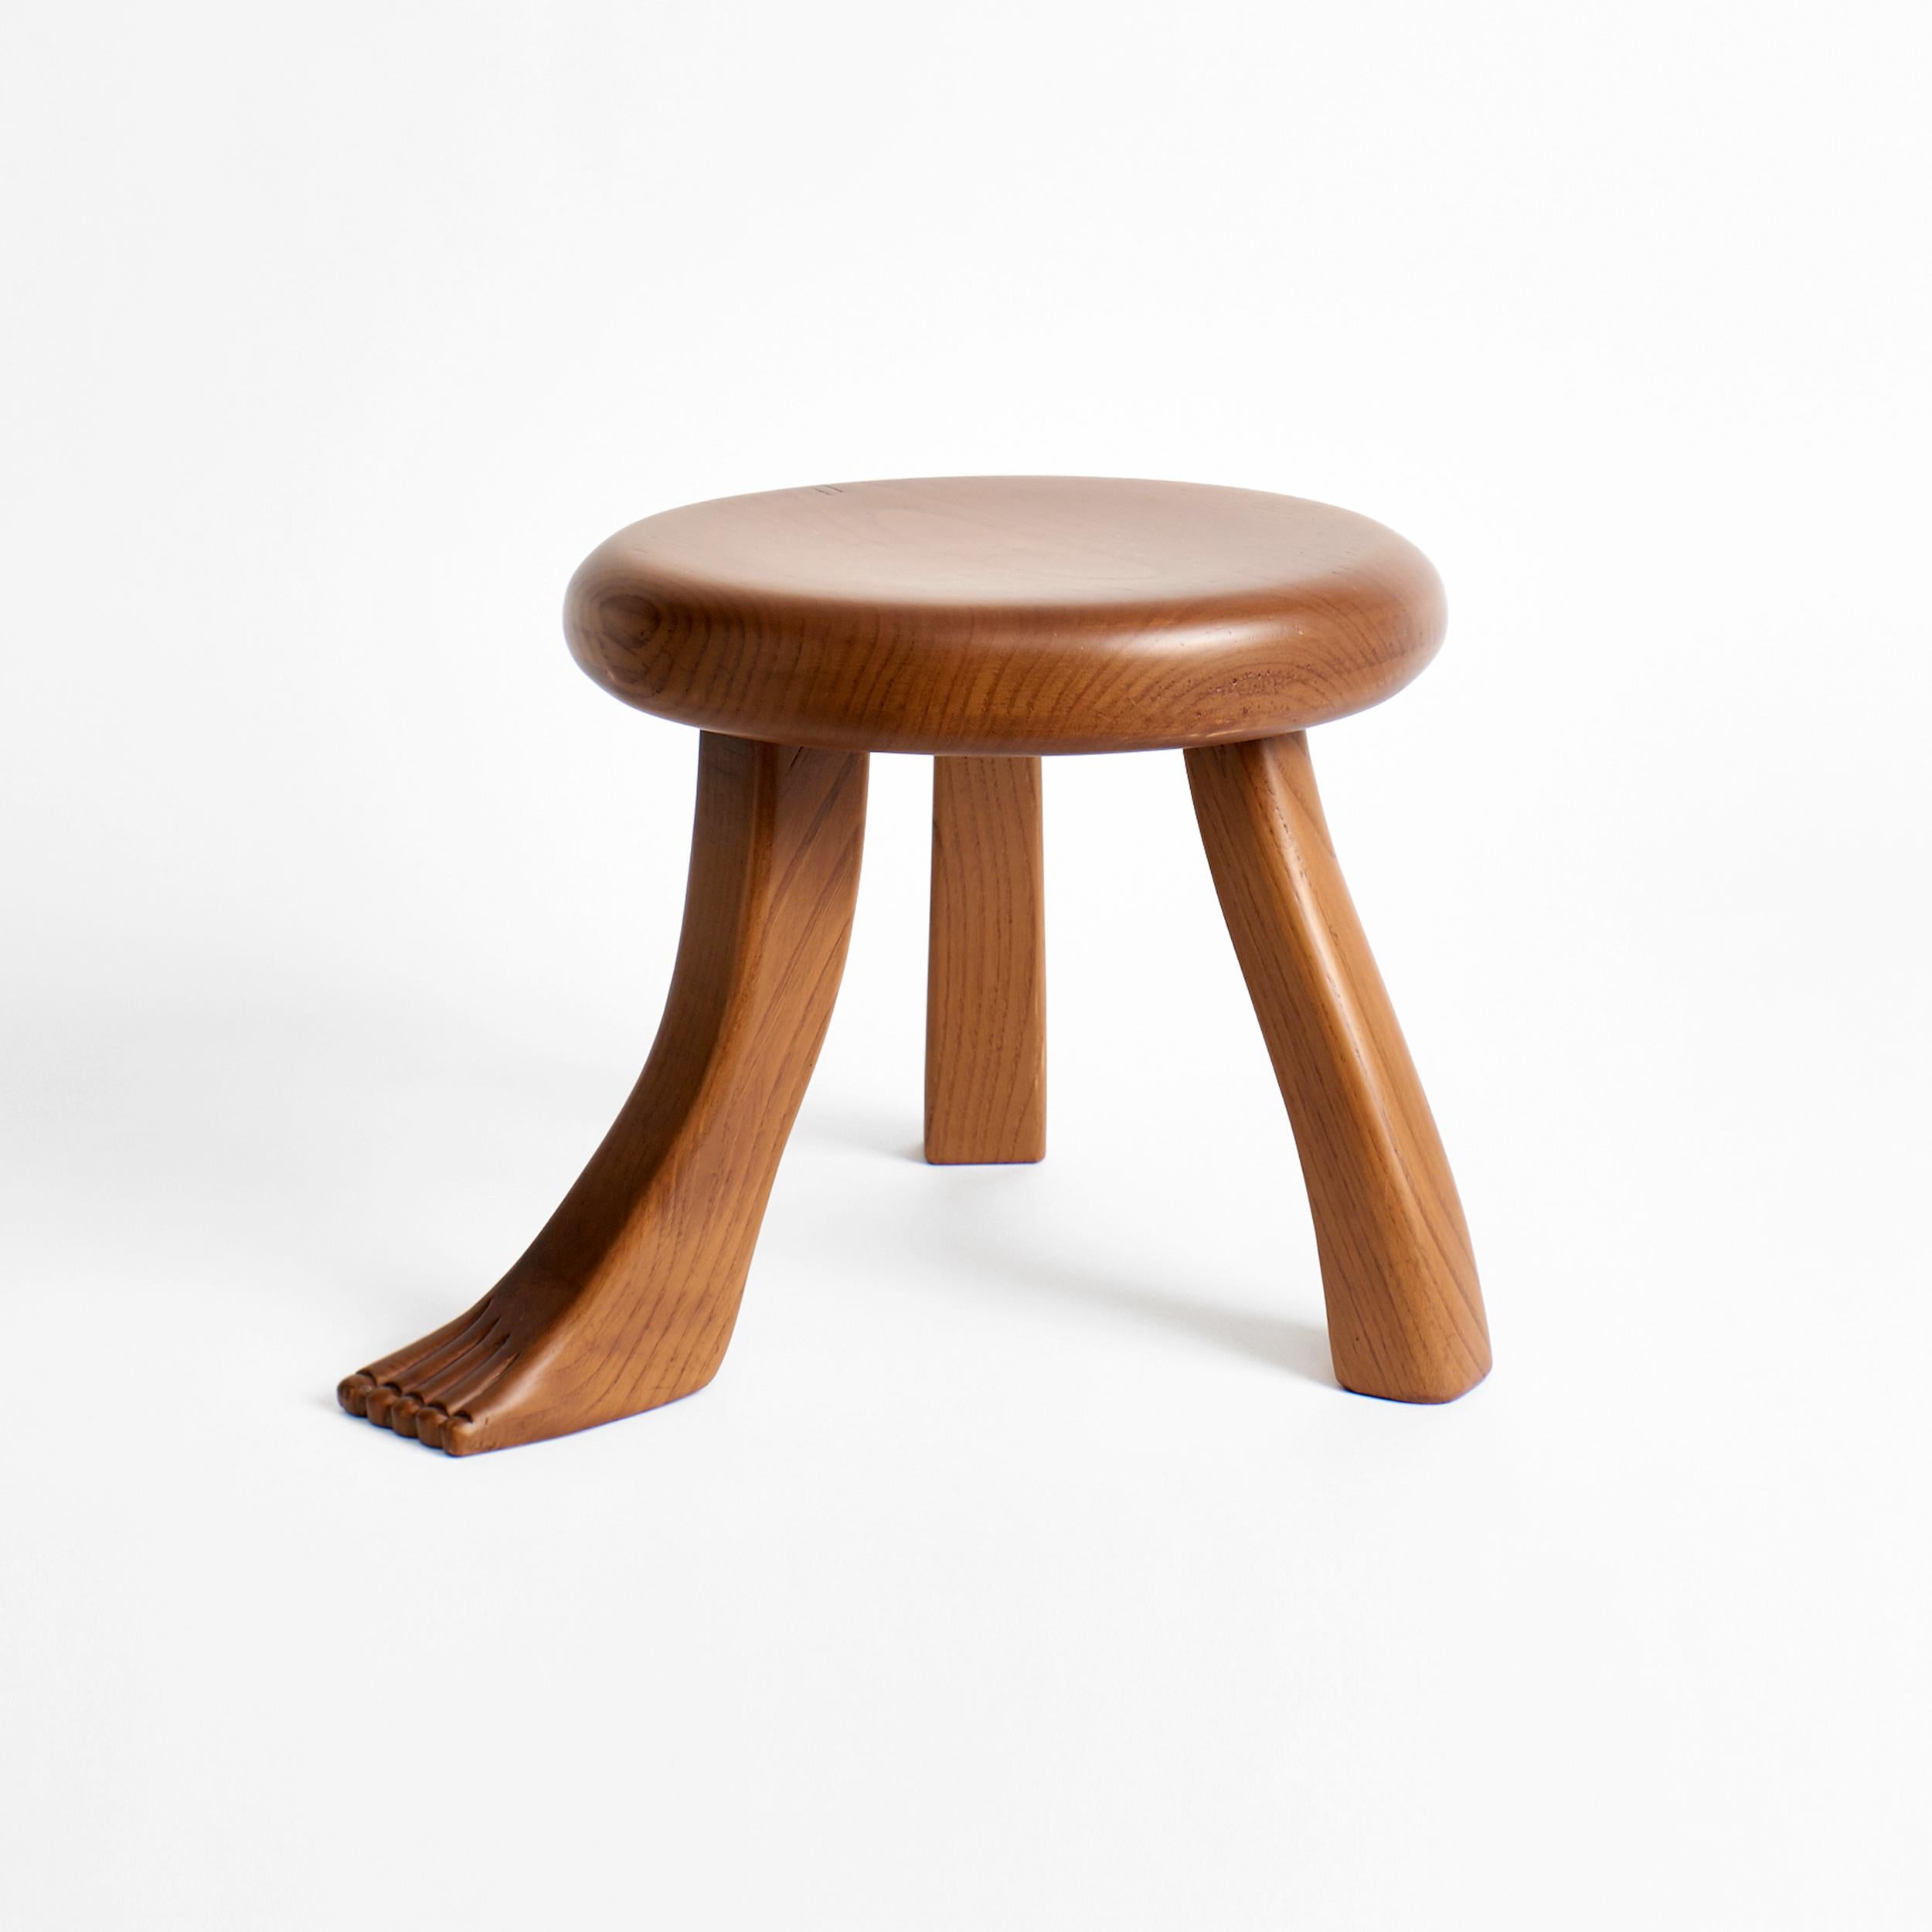 Portuguese Foot Stool by Project 213A